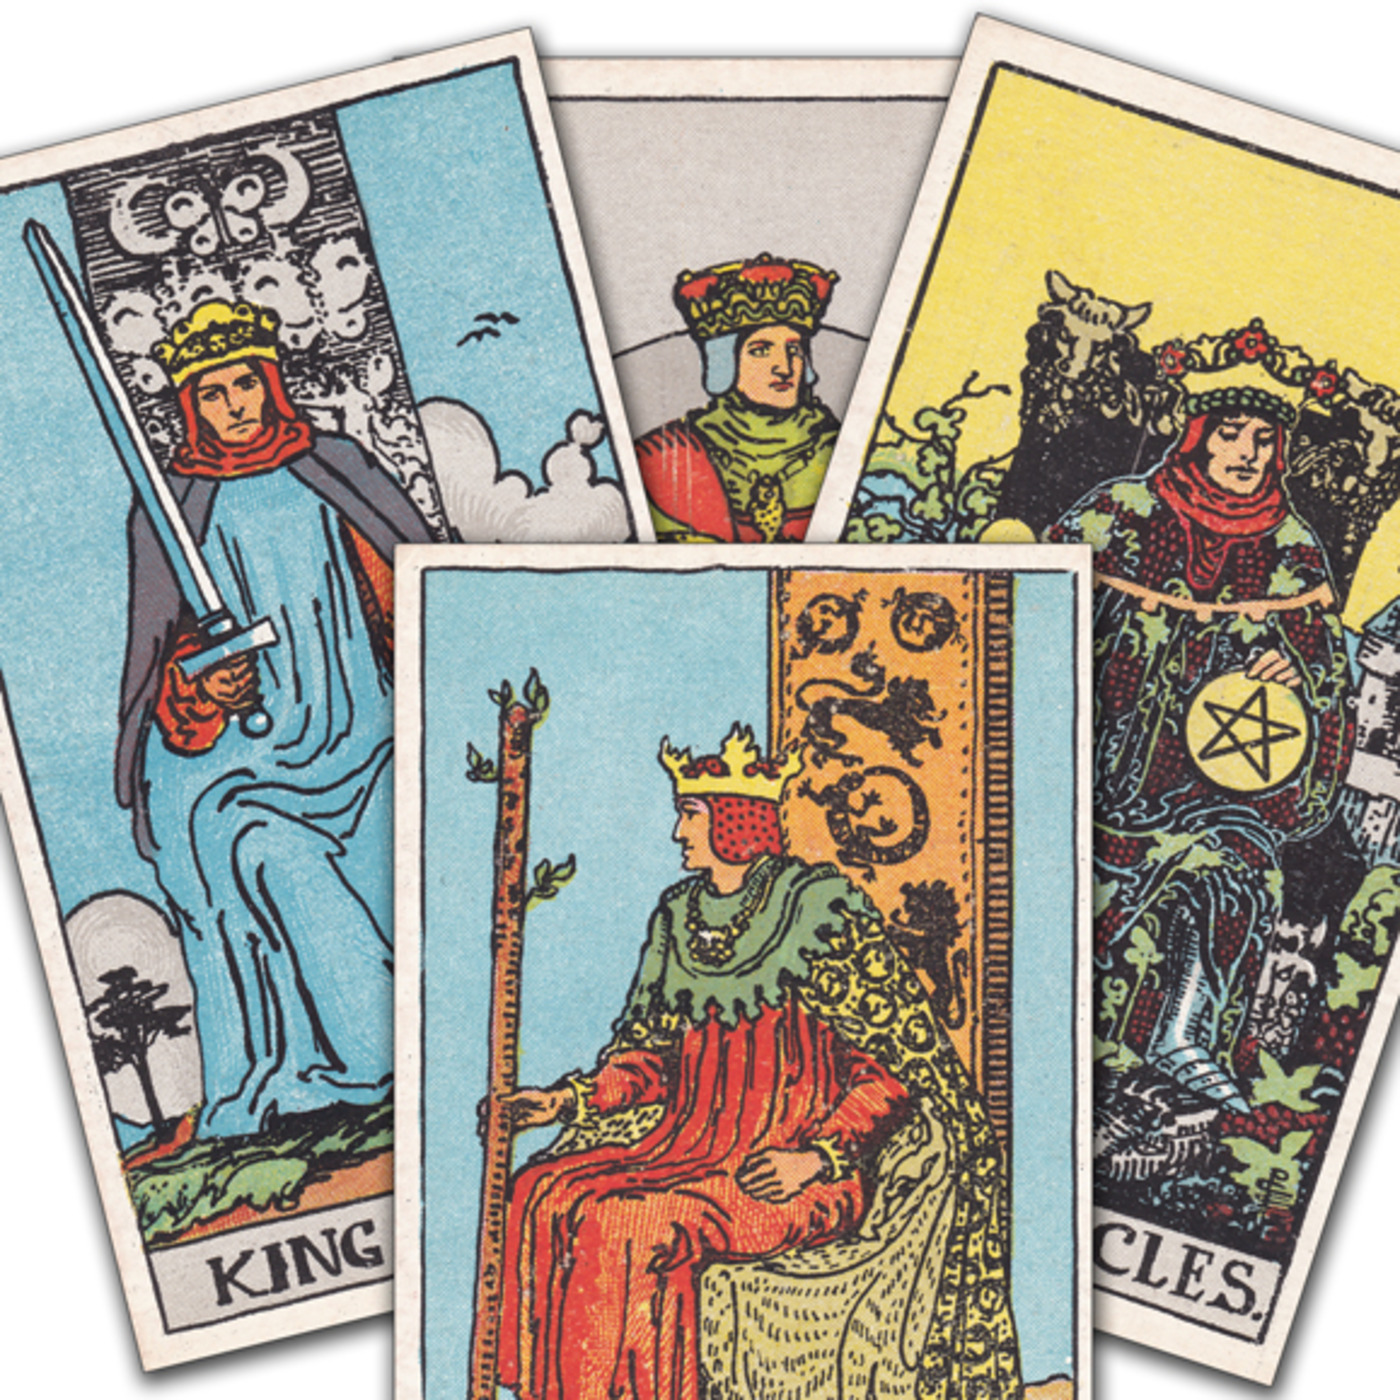 How to make sense of Court Cards (kings) beyond the ”traditional tarot meanings”